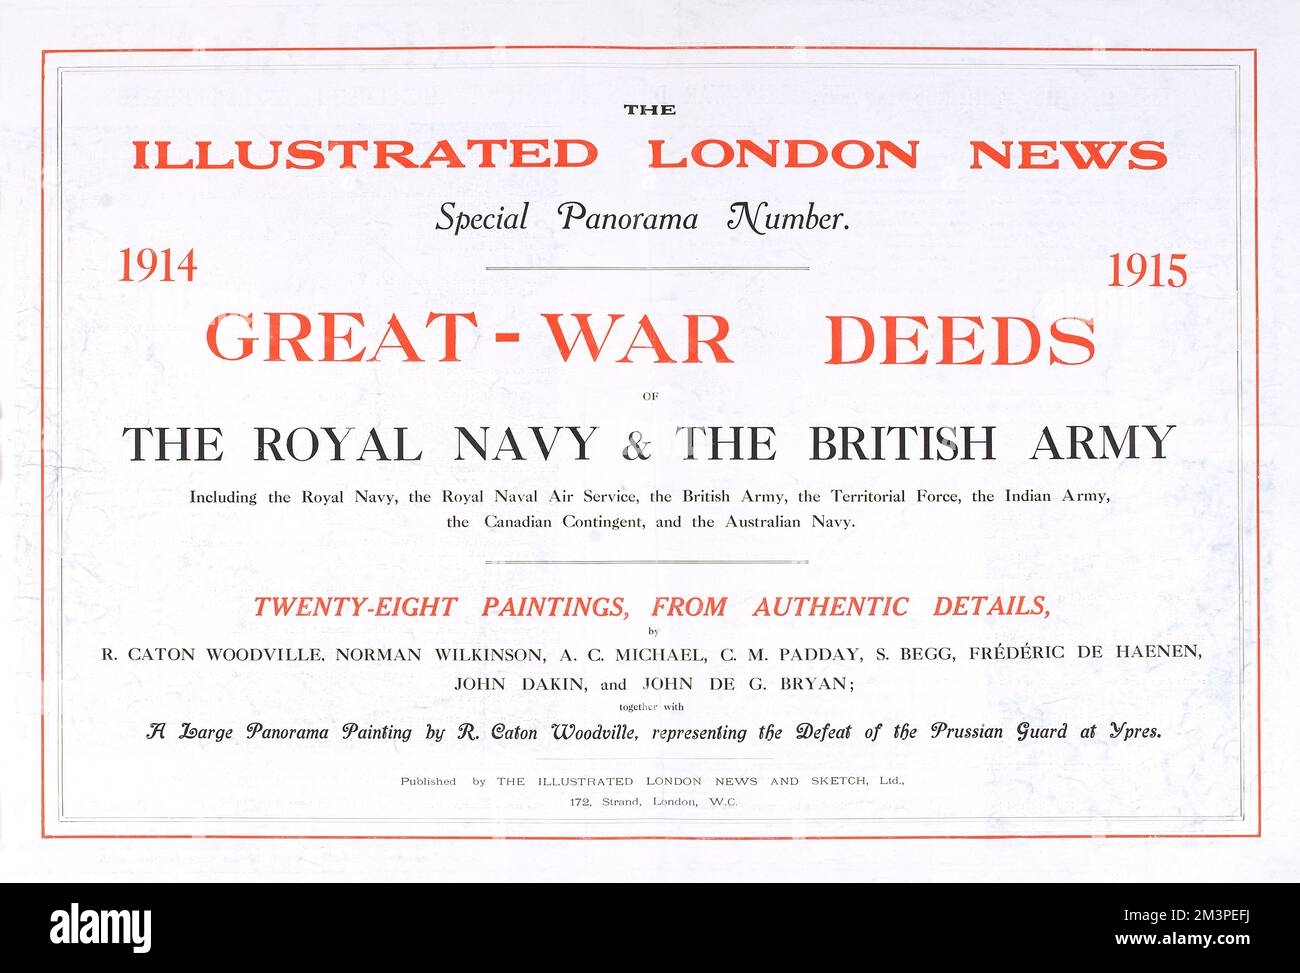 Title page of Great War Deeds, a special panorama supplement produced by the Illustrated London News in 1915, featuring heroic actions of the First World War.      Date: 1915 Stock Photo